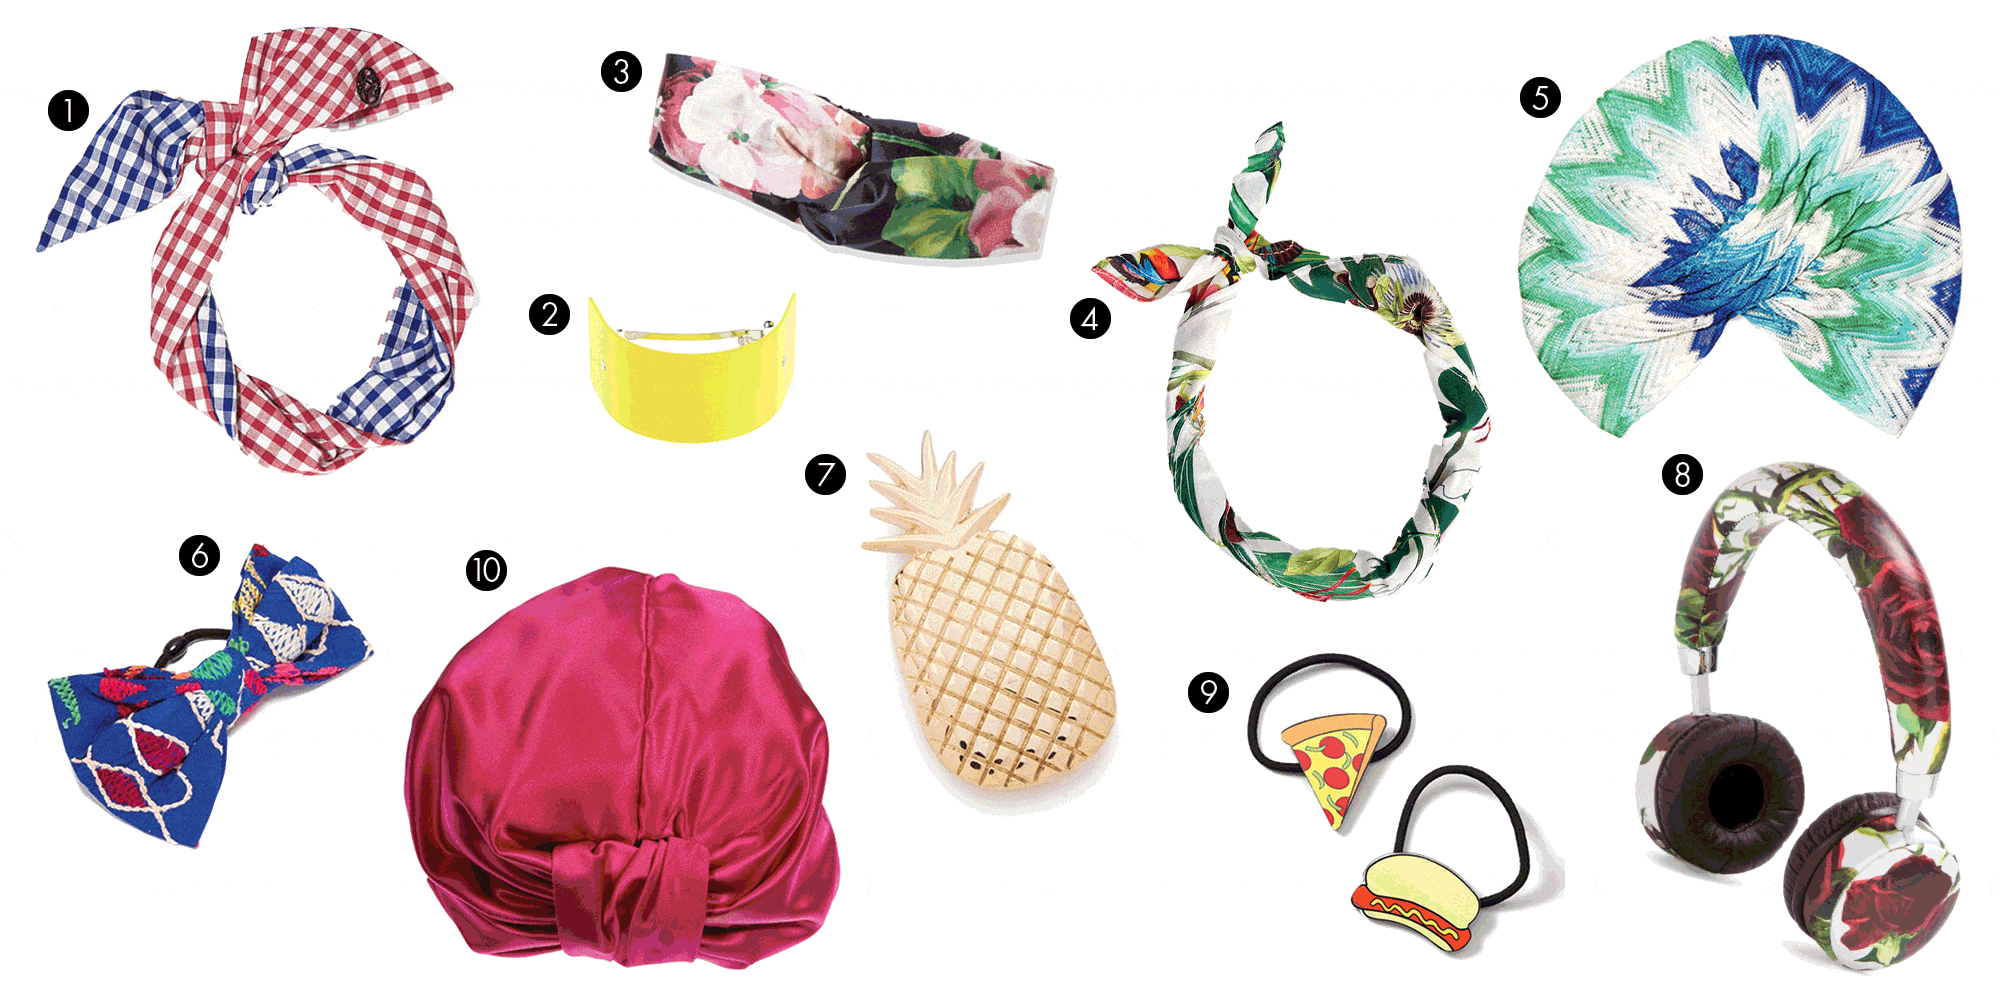 FIVE HAIR ACCESSORIES YOU CAN'T LIVE WITHOUT – Hershesons